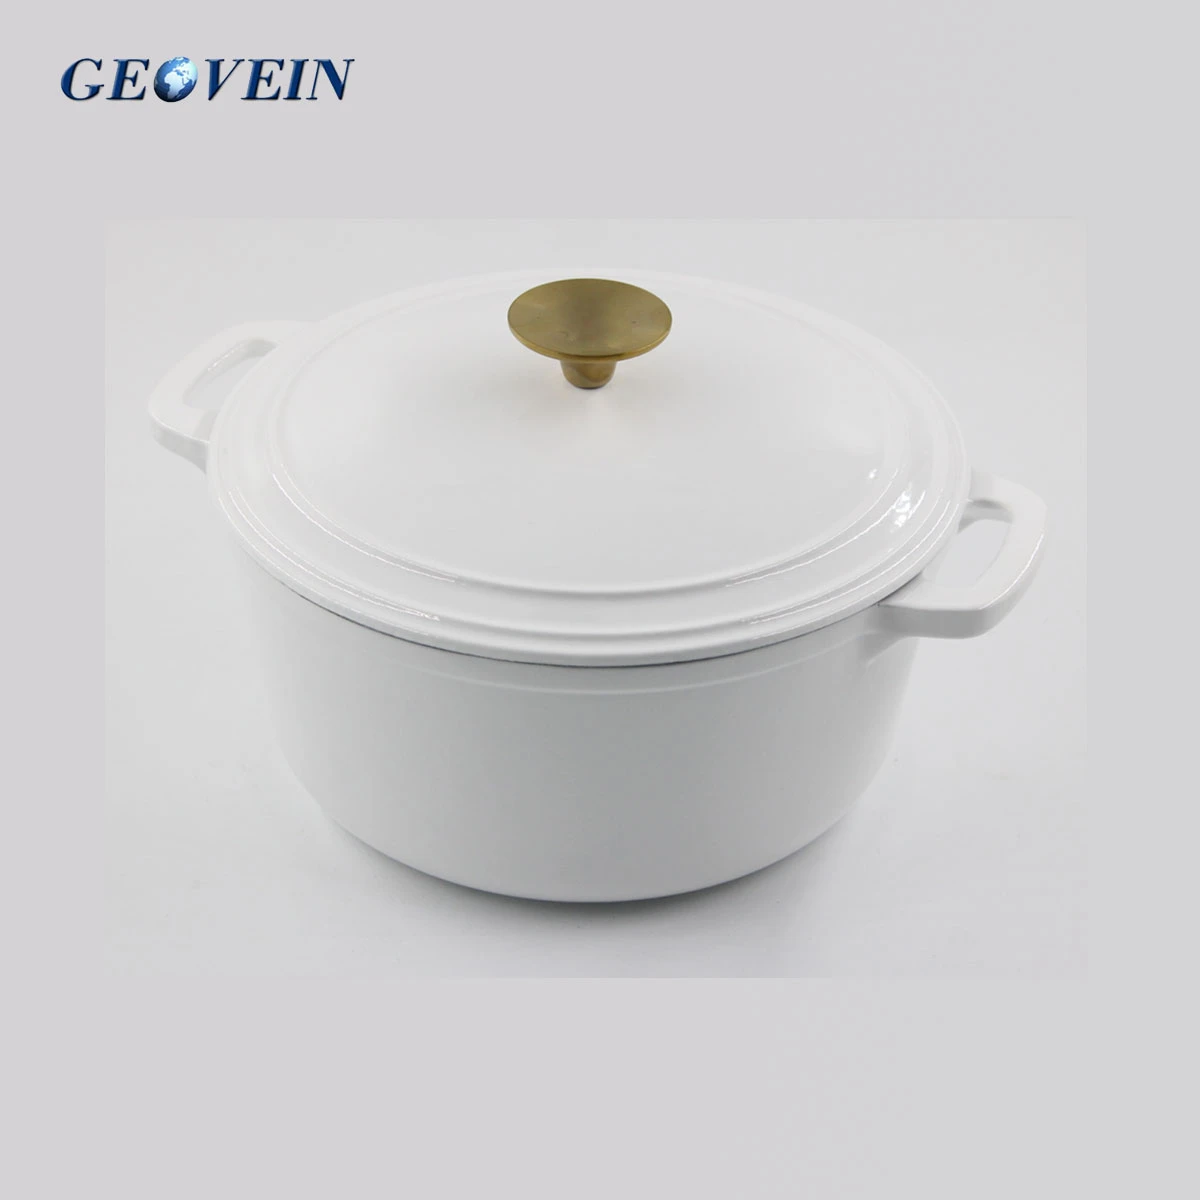 Geovein Popular White Color Round Enameled Cast Iron Casserole Dish Dutch Oven With Lid